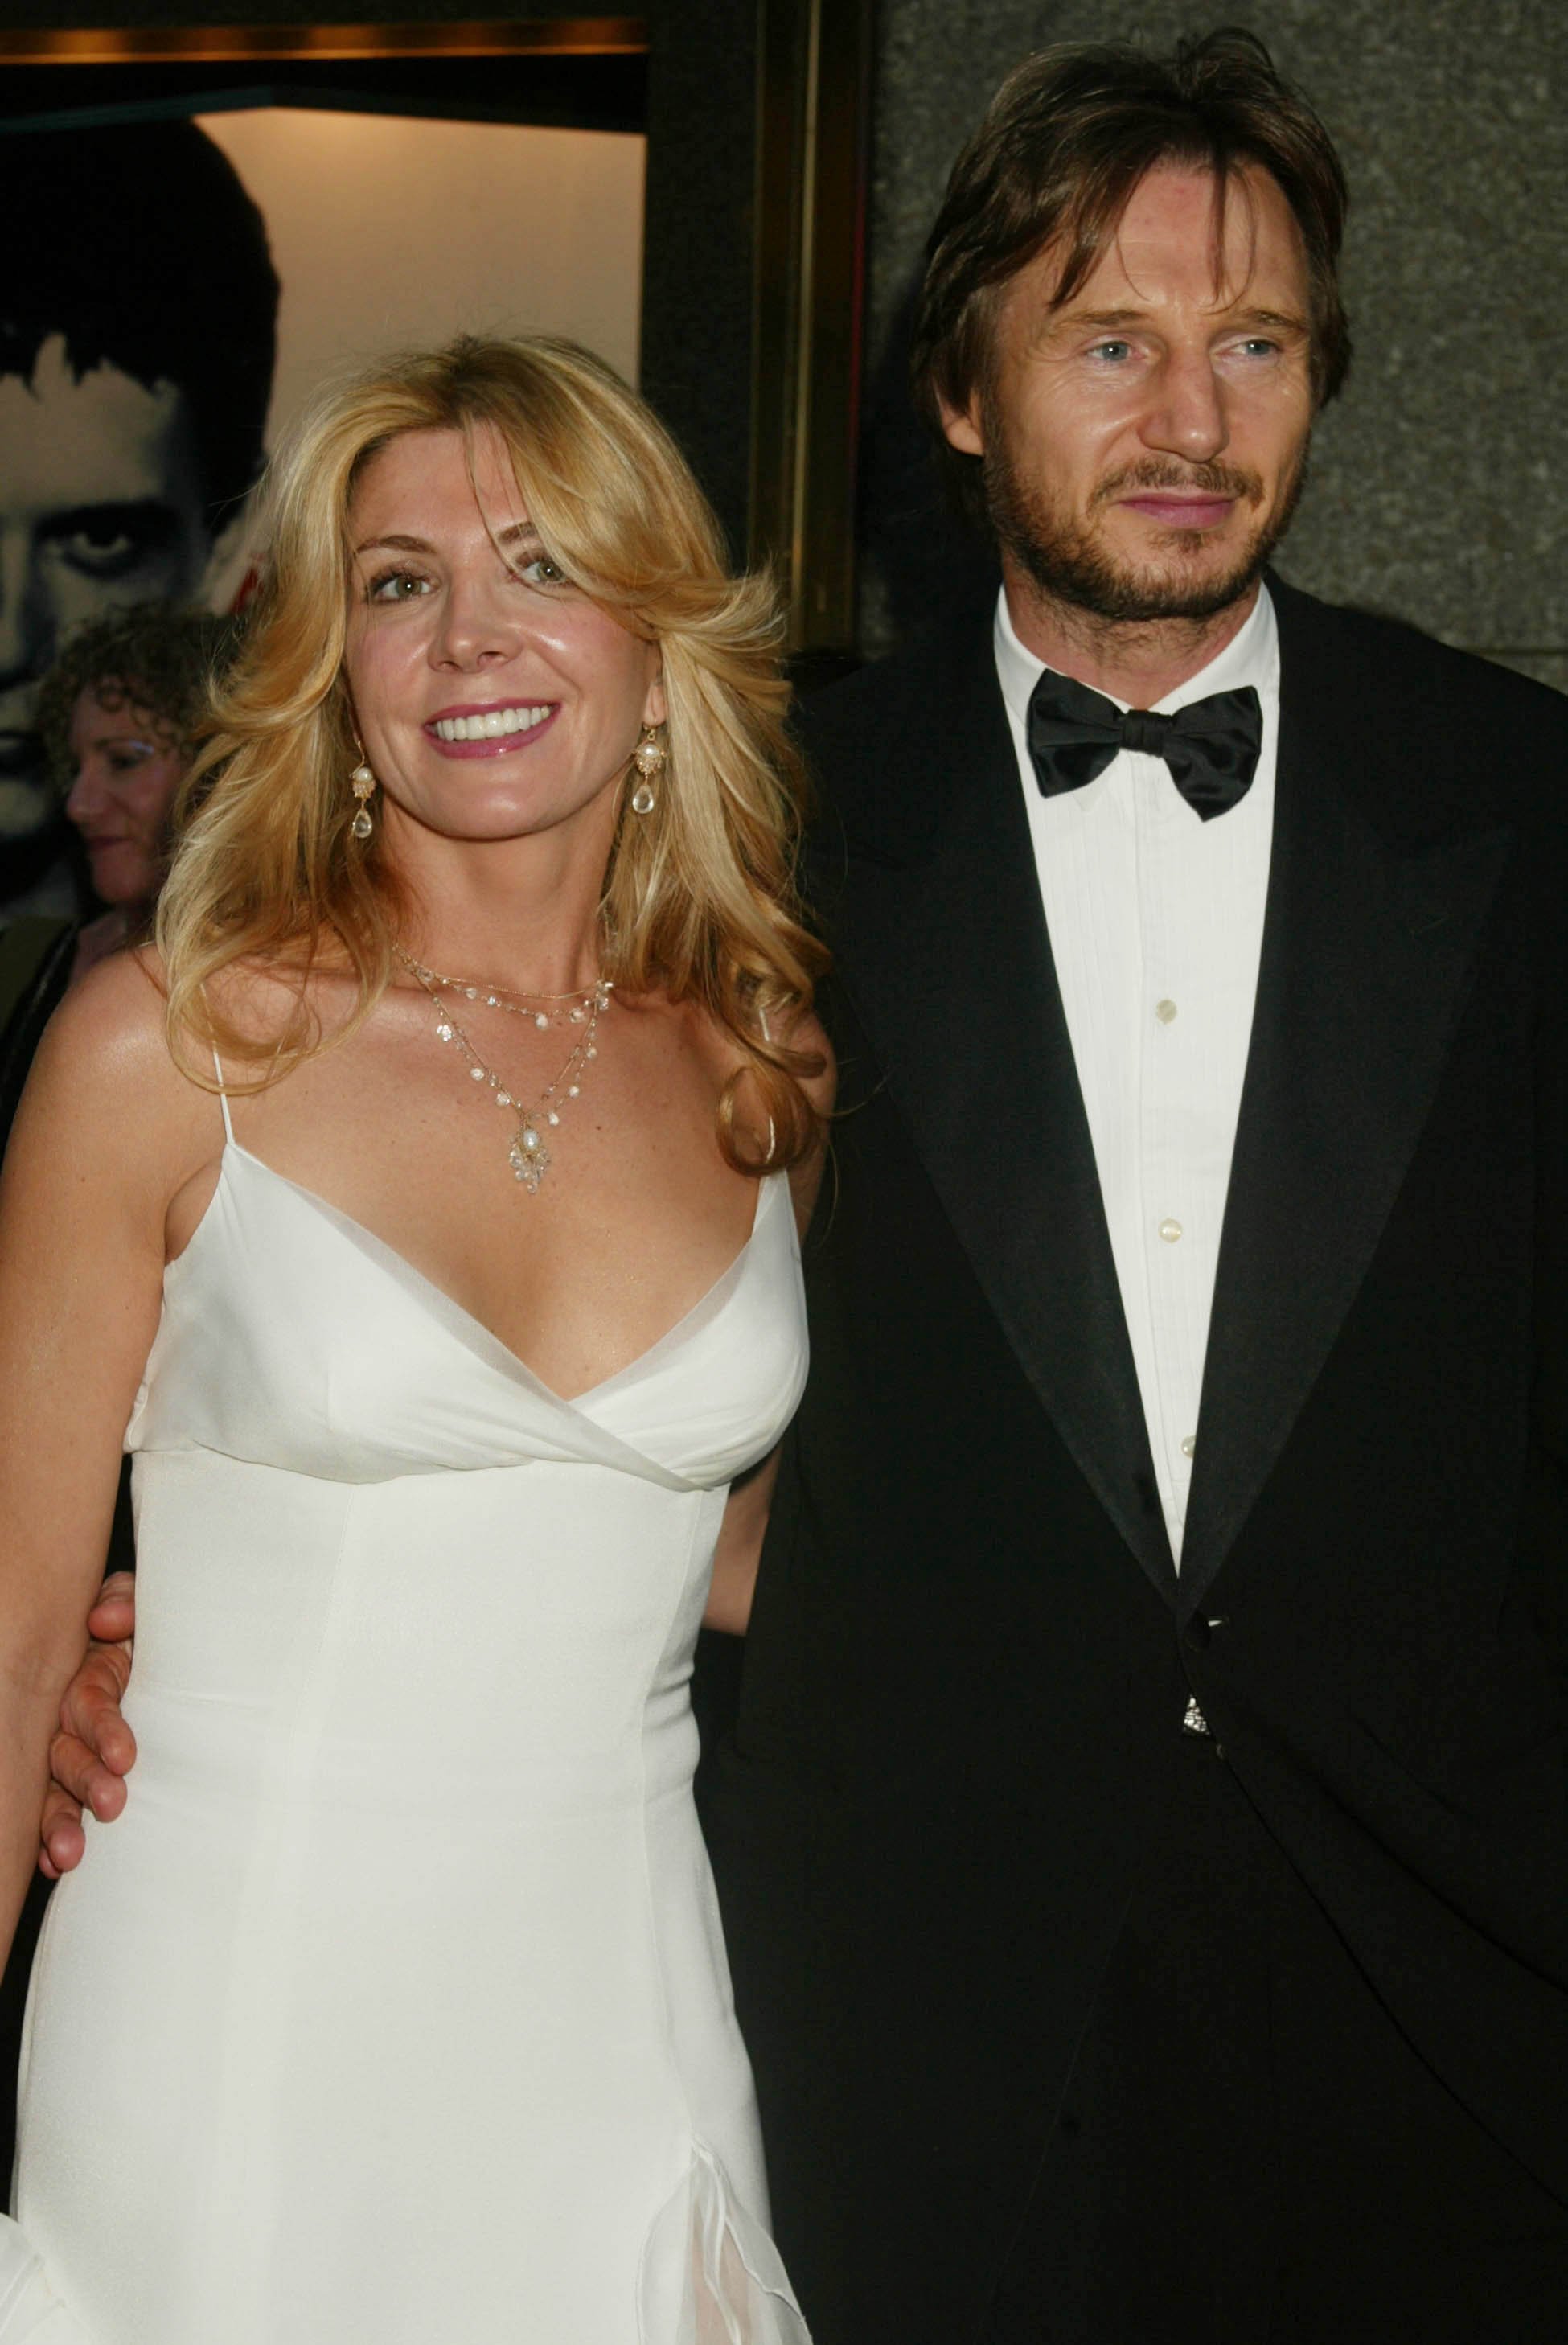 Natasha Richardson and her husband Liam Neeson arriving for the 56th Annual Tony Awards at Radio City Music Hall on June 2, 2002 in New York City. / Source: Getty Images